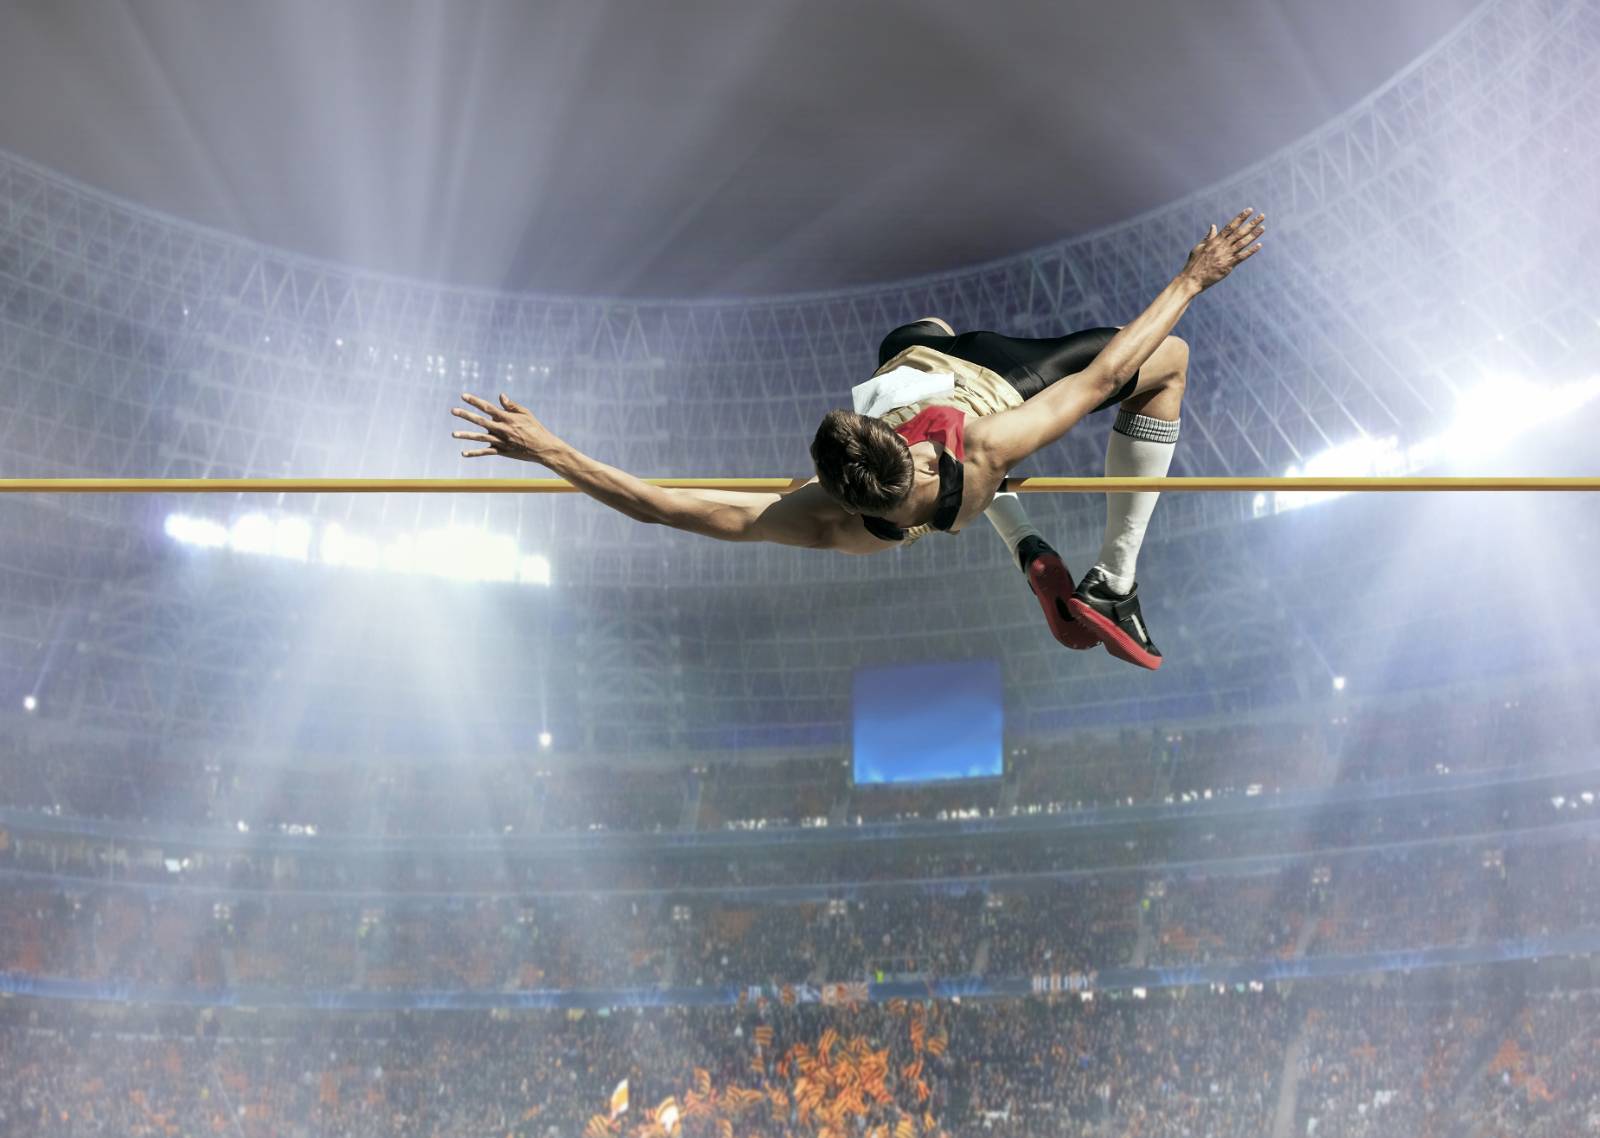 Image of a man during a high jump competition.